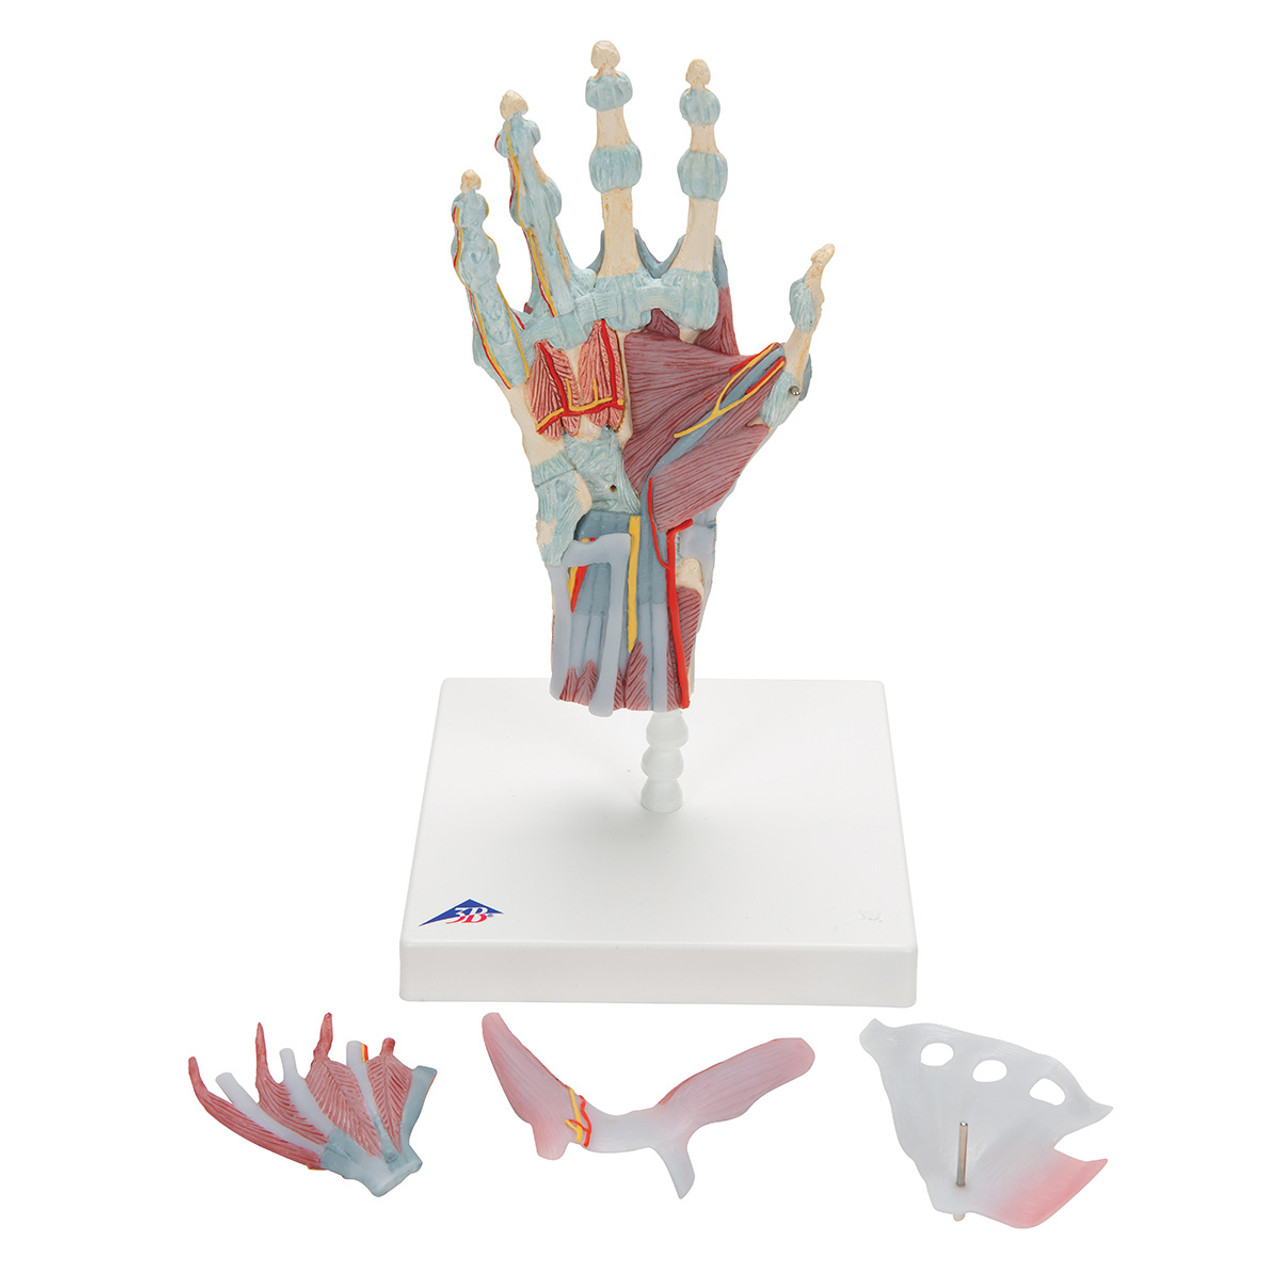 Axis Scientific Female Pelvis Model with Muscles Pelvic Floor, Ligaments,  and Nerves Anatomy Model